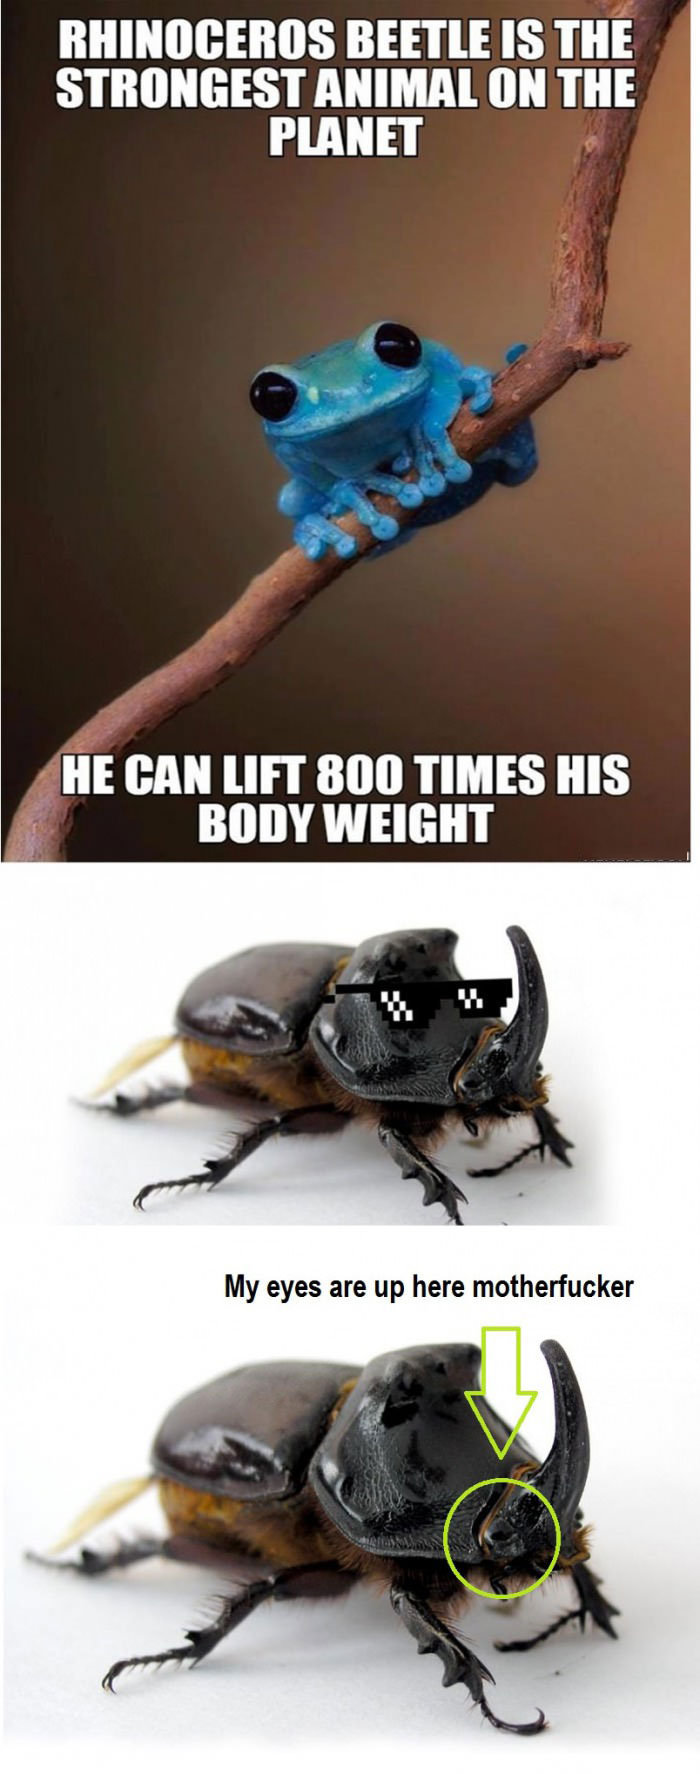 rhinoceros beetle is the strongest animal on the planet, he can lift 800 times his body weight